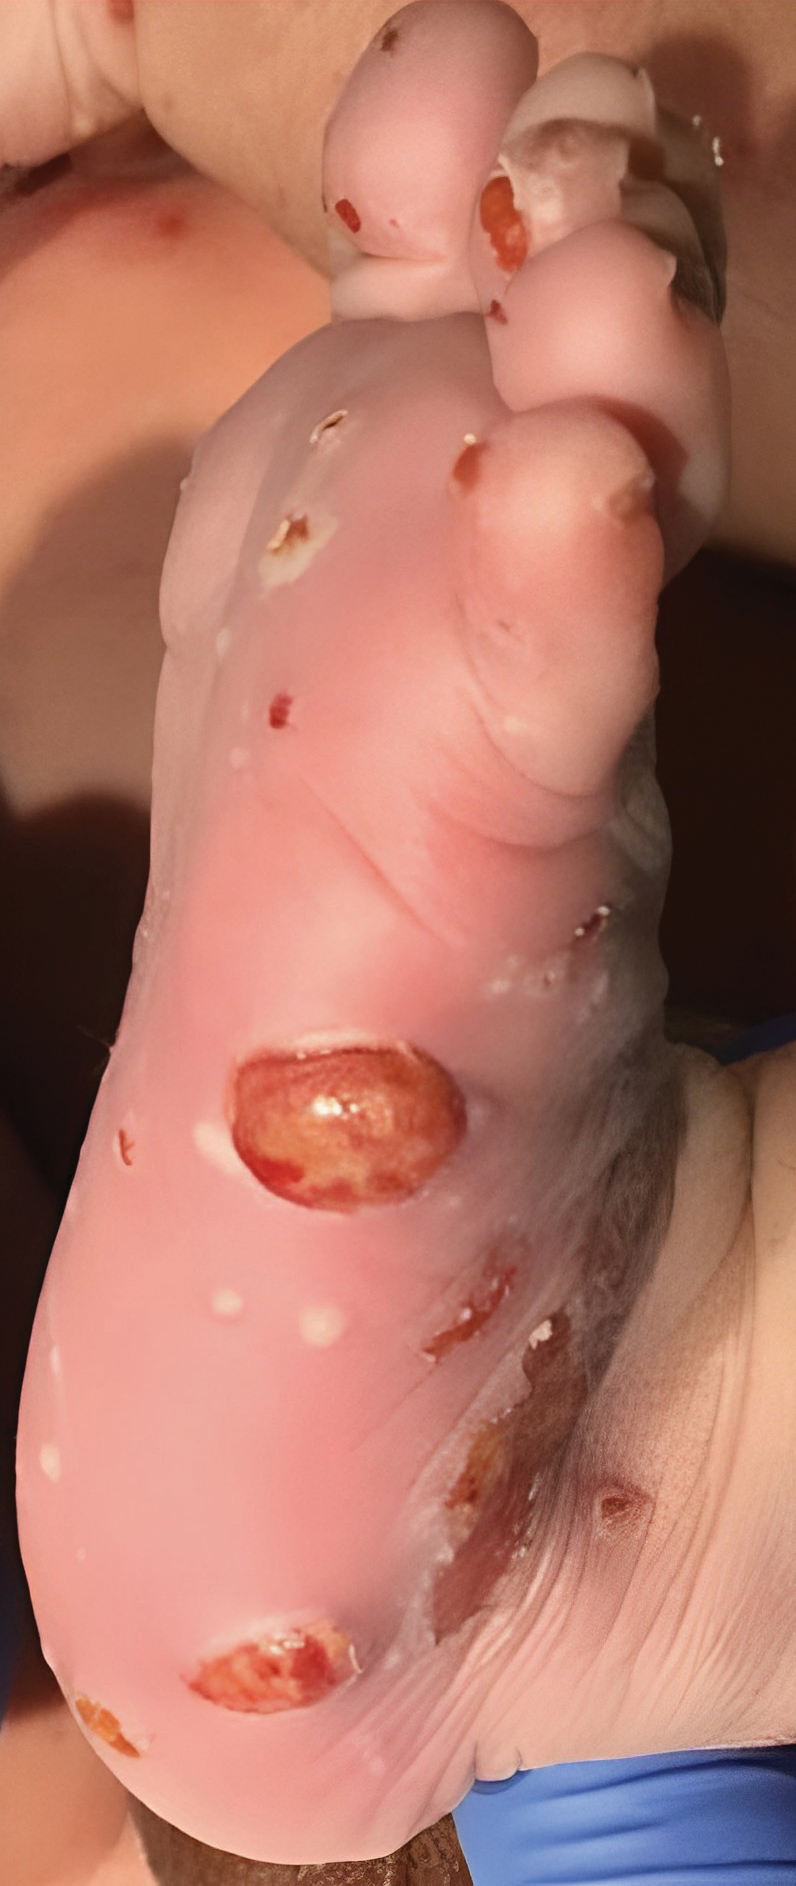 Disseminated papules and nodules on the skin and oral mucosa in an infant